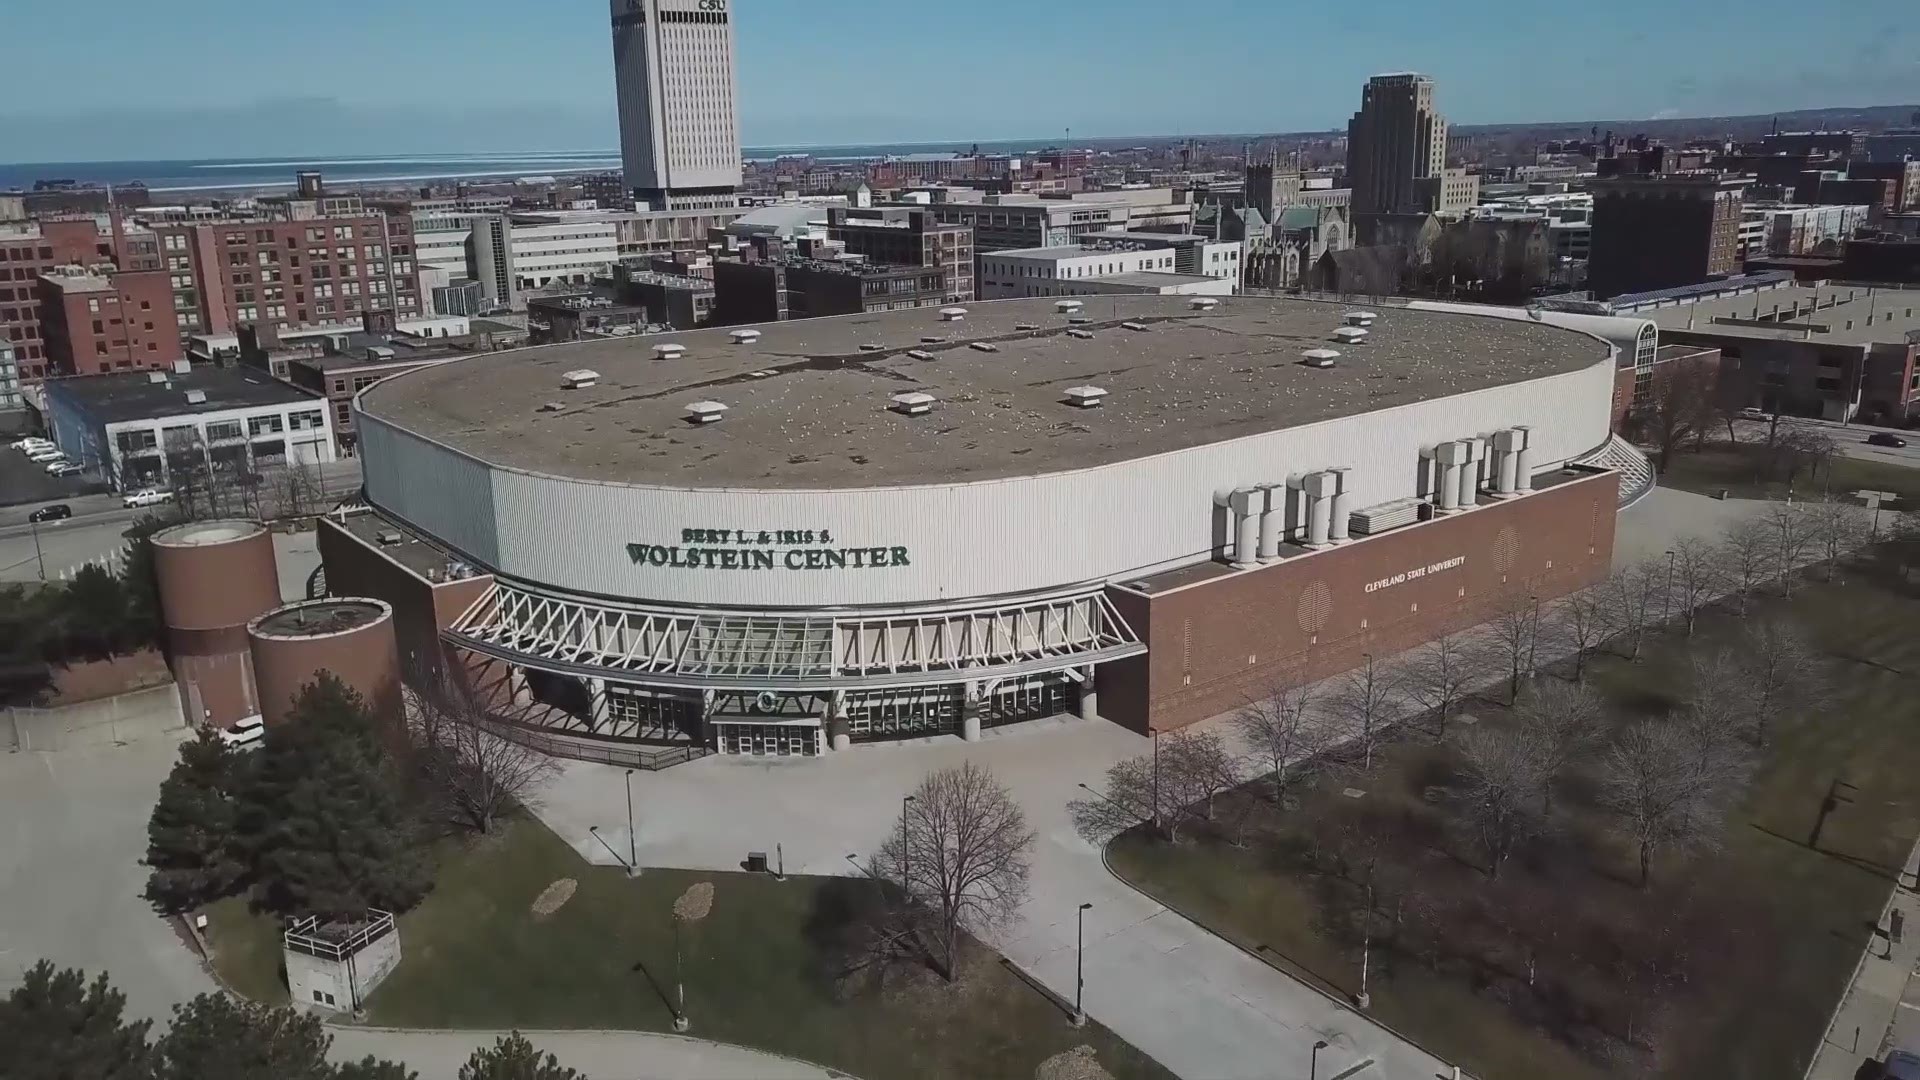 Cleveland State University's Wolstein Center will be the site of a COVID-19 mass vaccination clinic starting on March 17.